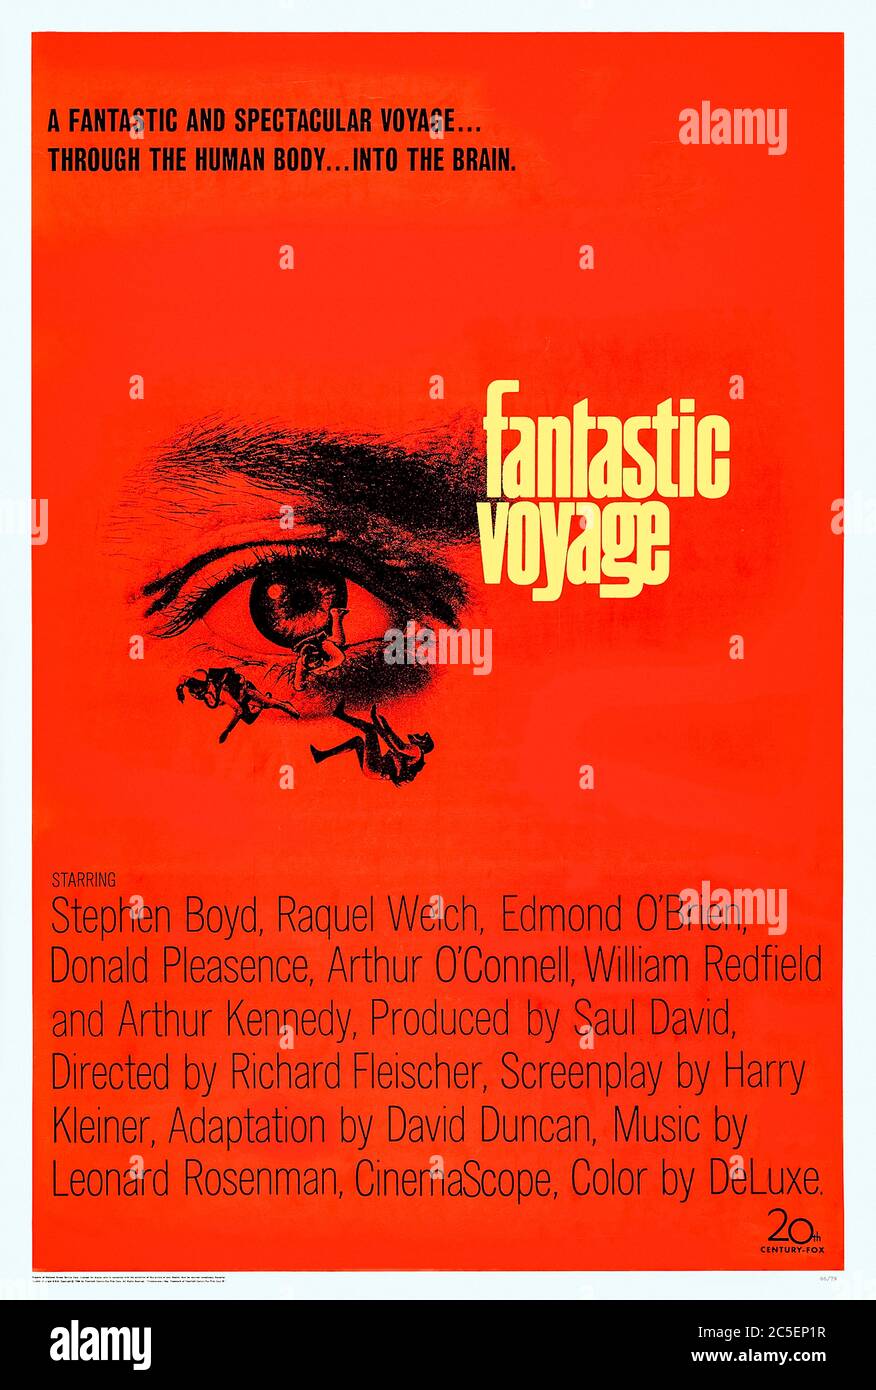 Fantastic Voyage (1966) directed by Richard Fleischer and starring Stephen Boyd, Raquel Welch, Edmond O'Brien and Donald Pleasence. A crew is shrunk and inserted into the body of a scientist to save his life in this memorable no expense spared sci-fi classic. Photograph of fully restored and linen backed original 1966 US one sheet poster. ***EDITORIAL USE ONLY*** Credit: BFA / Twentieth Century Fox Stock Photo